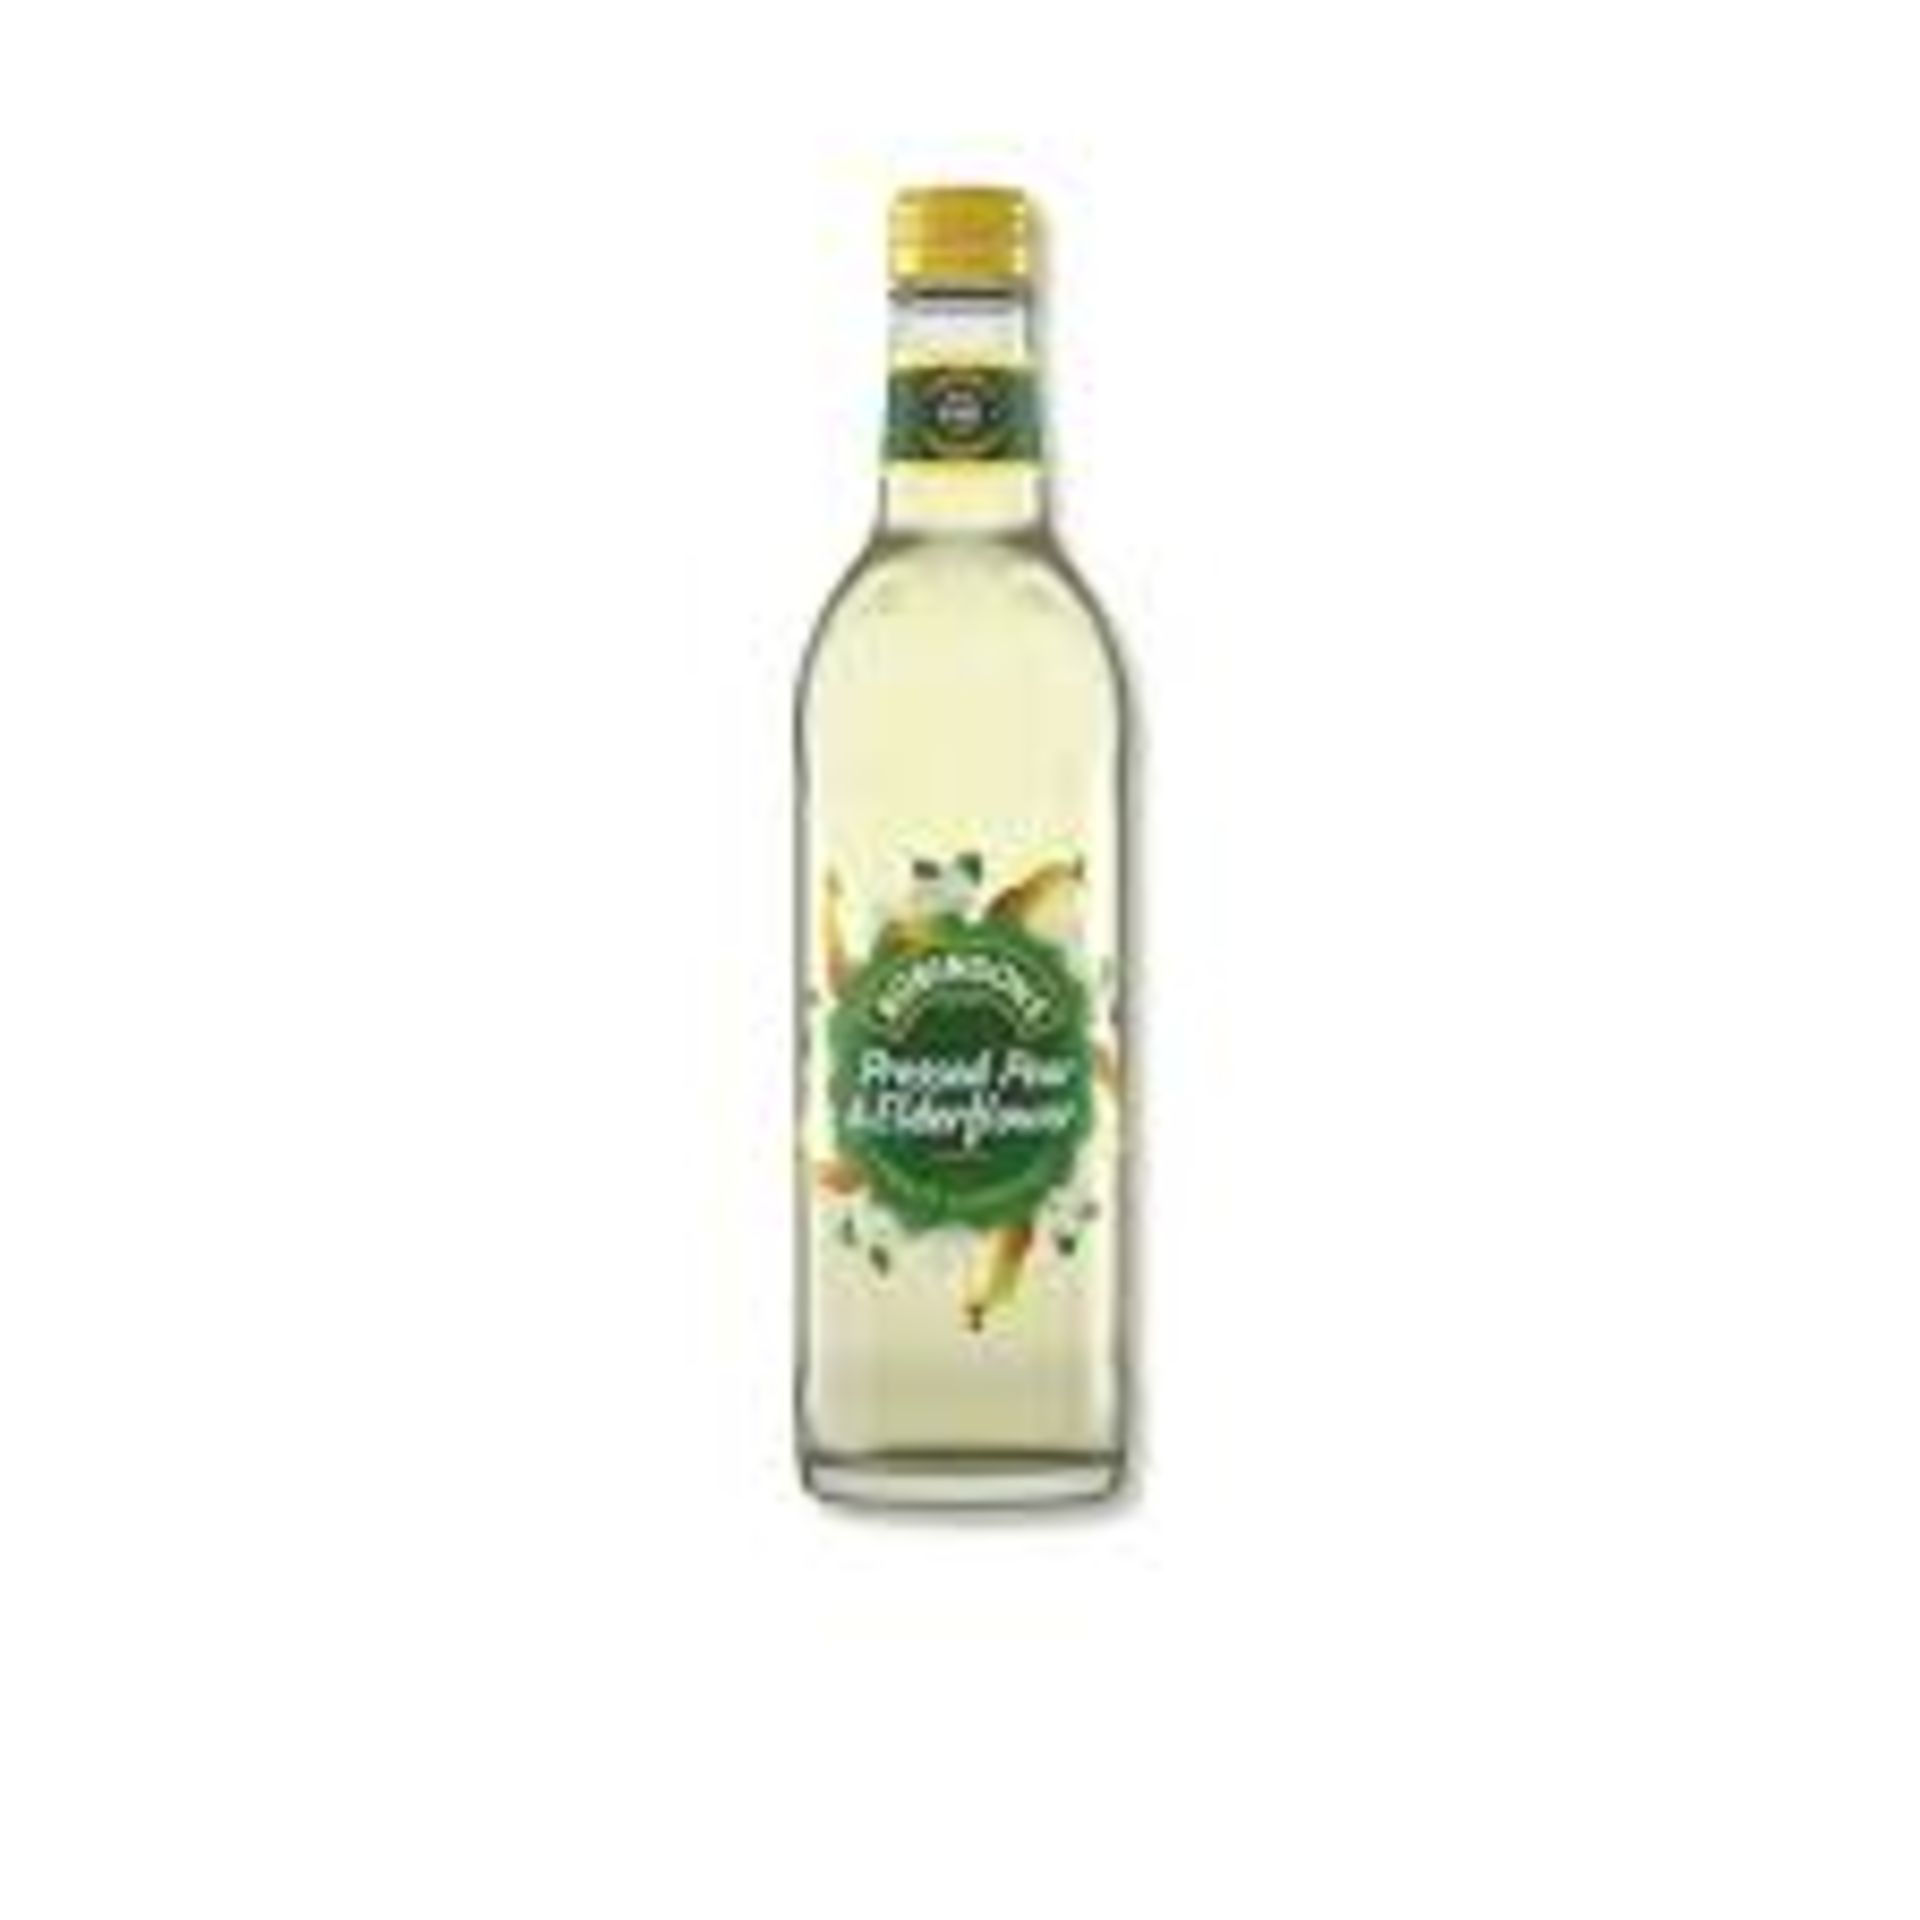 RRP £1314 (Appox. Count 74) spW57n3402q 60 x Robinsons Fruit Cordials Pressed Pear and